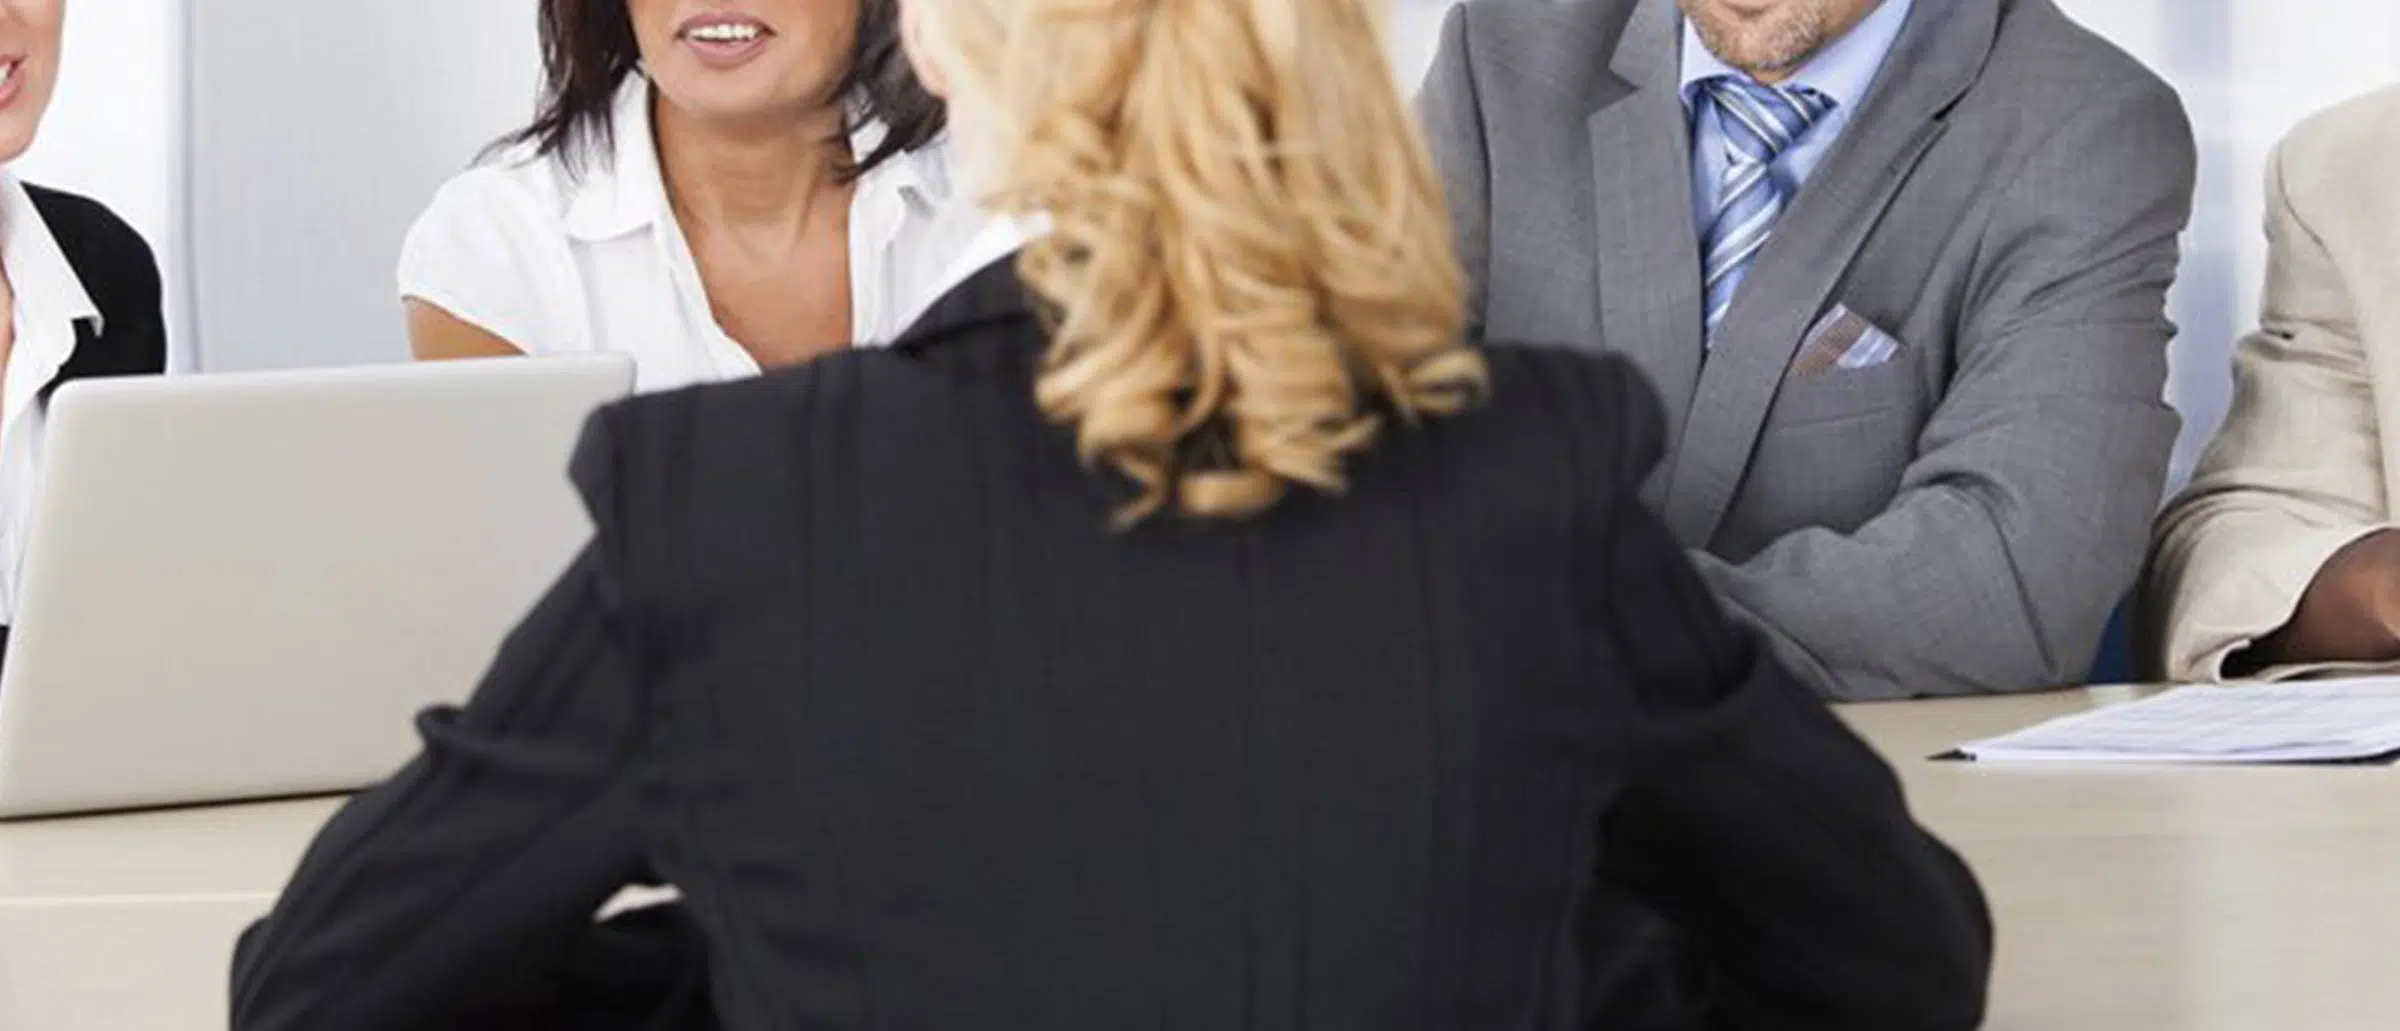 4 Benefits of Using Panel Interviews to Assess Legal Candidates